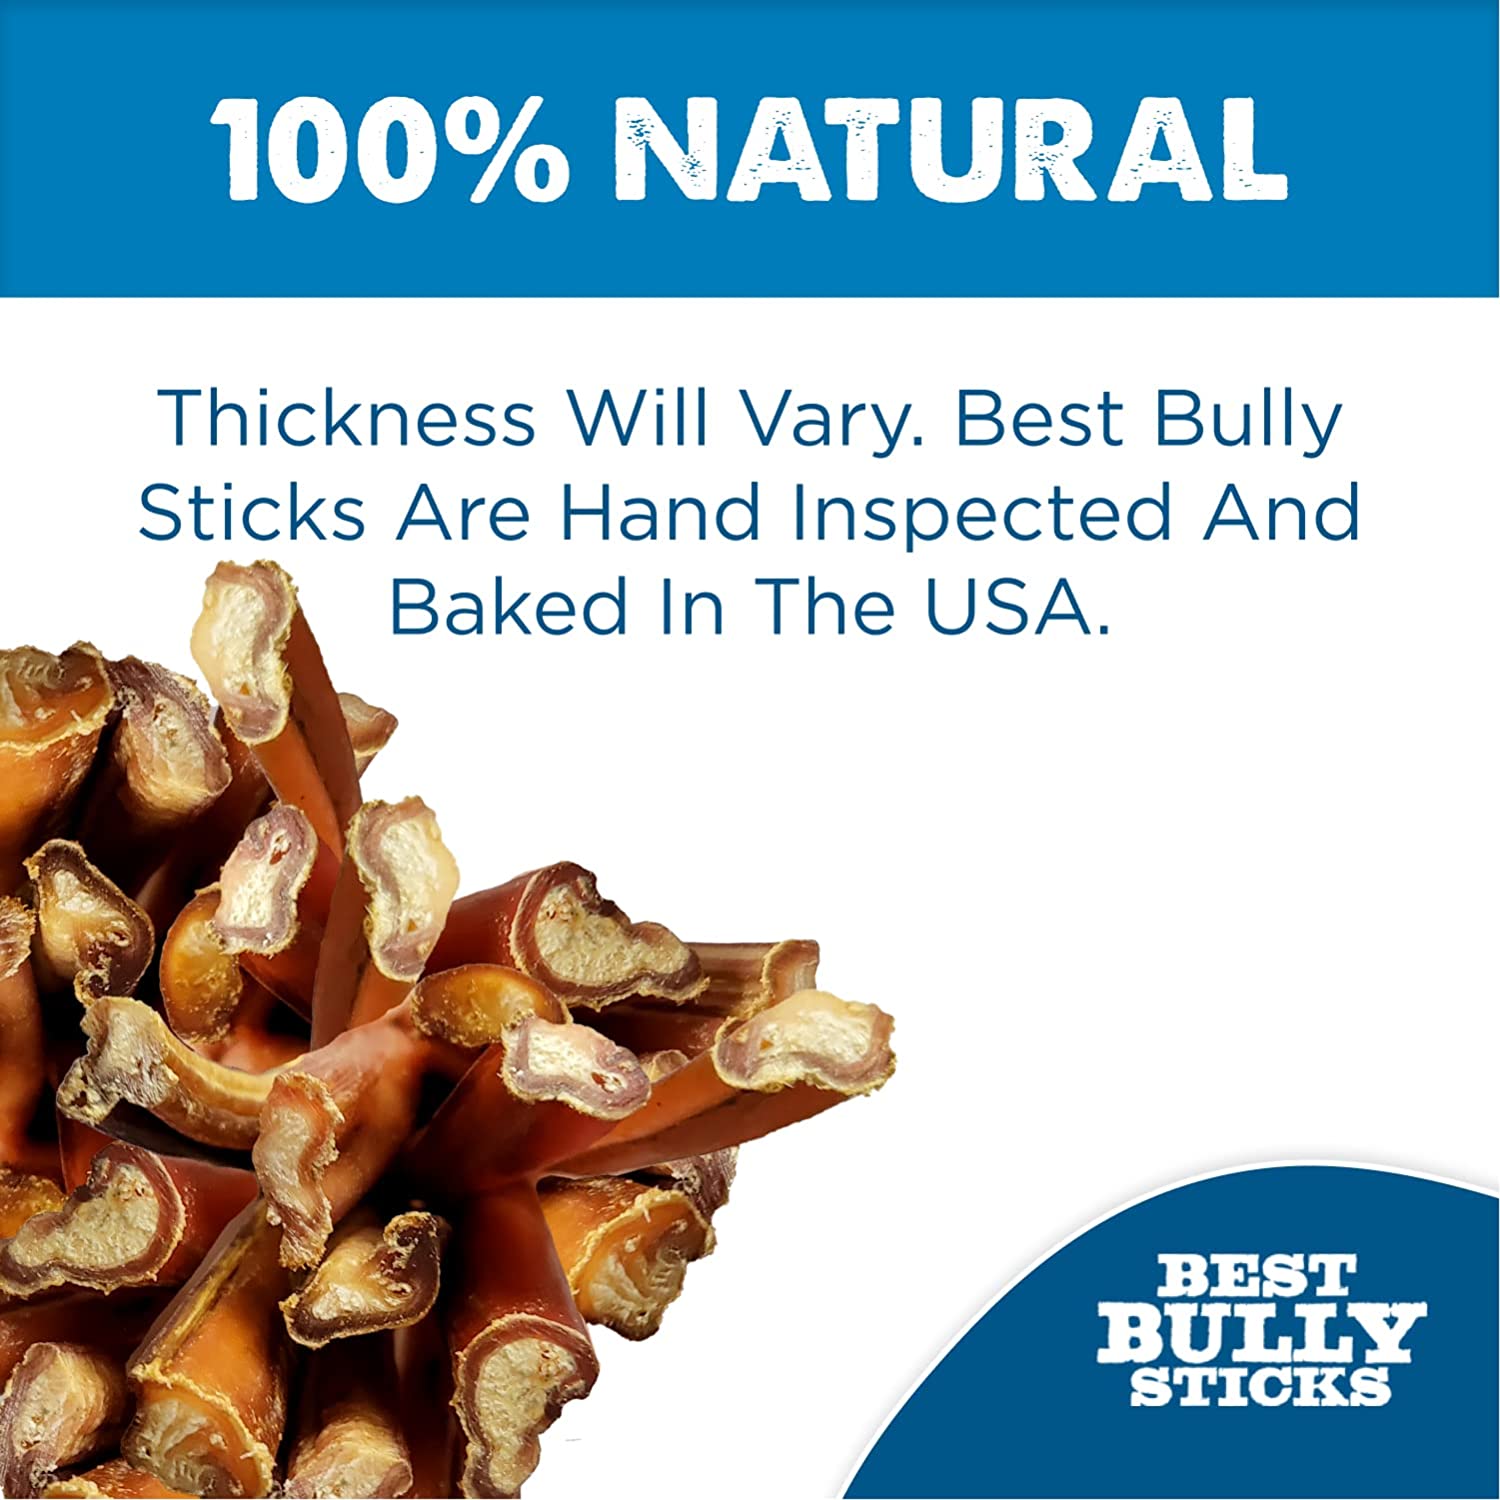 Best Bully Sticks 4 Inch All-Natural Bully Sticks for Dogs - 4” Fully Digestible, 100% Grass-Fed Beef, Grain and Rawhide Free | 8 oz